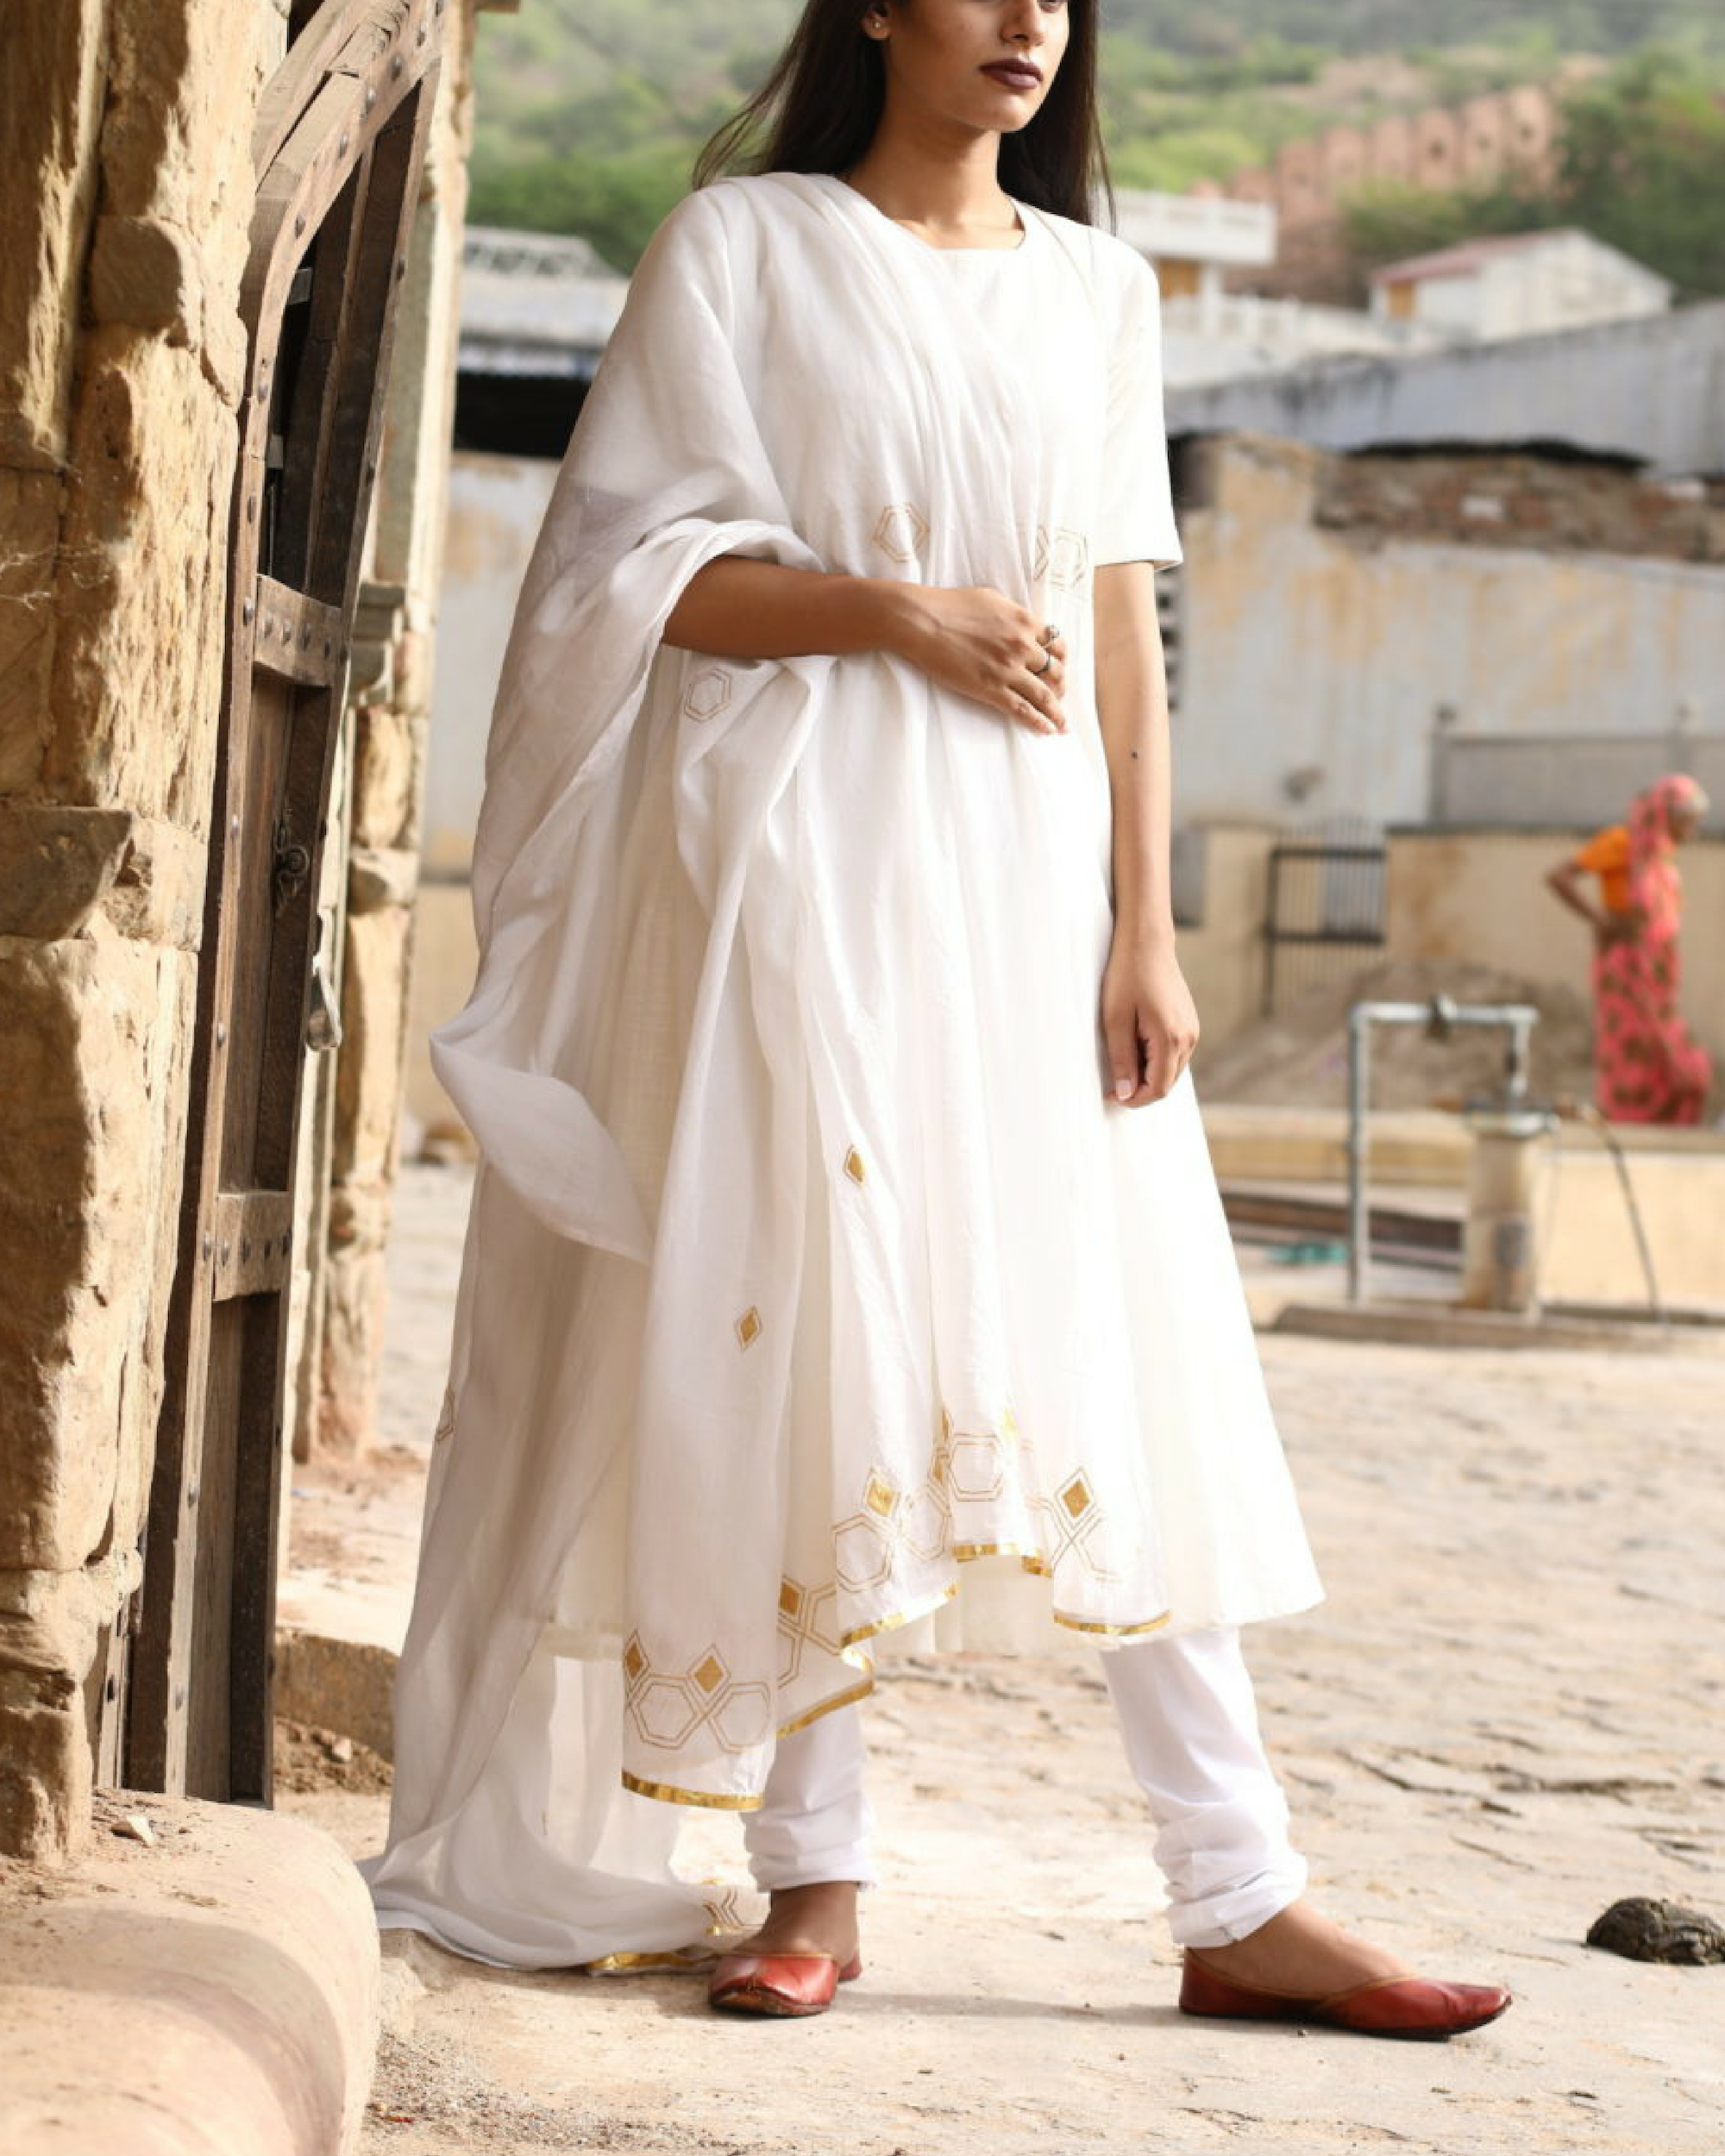 White And Gold Anarkali Kurta Set By Kathaa The Secret Label The asymmetric neckline is very much in vogue nowadays, especially with designer pieces. white and gold anarkali kurta set